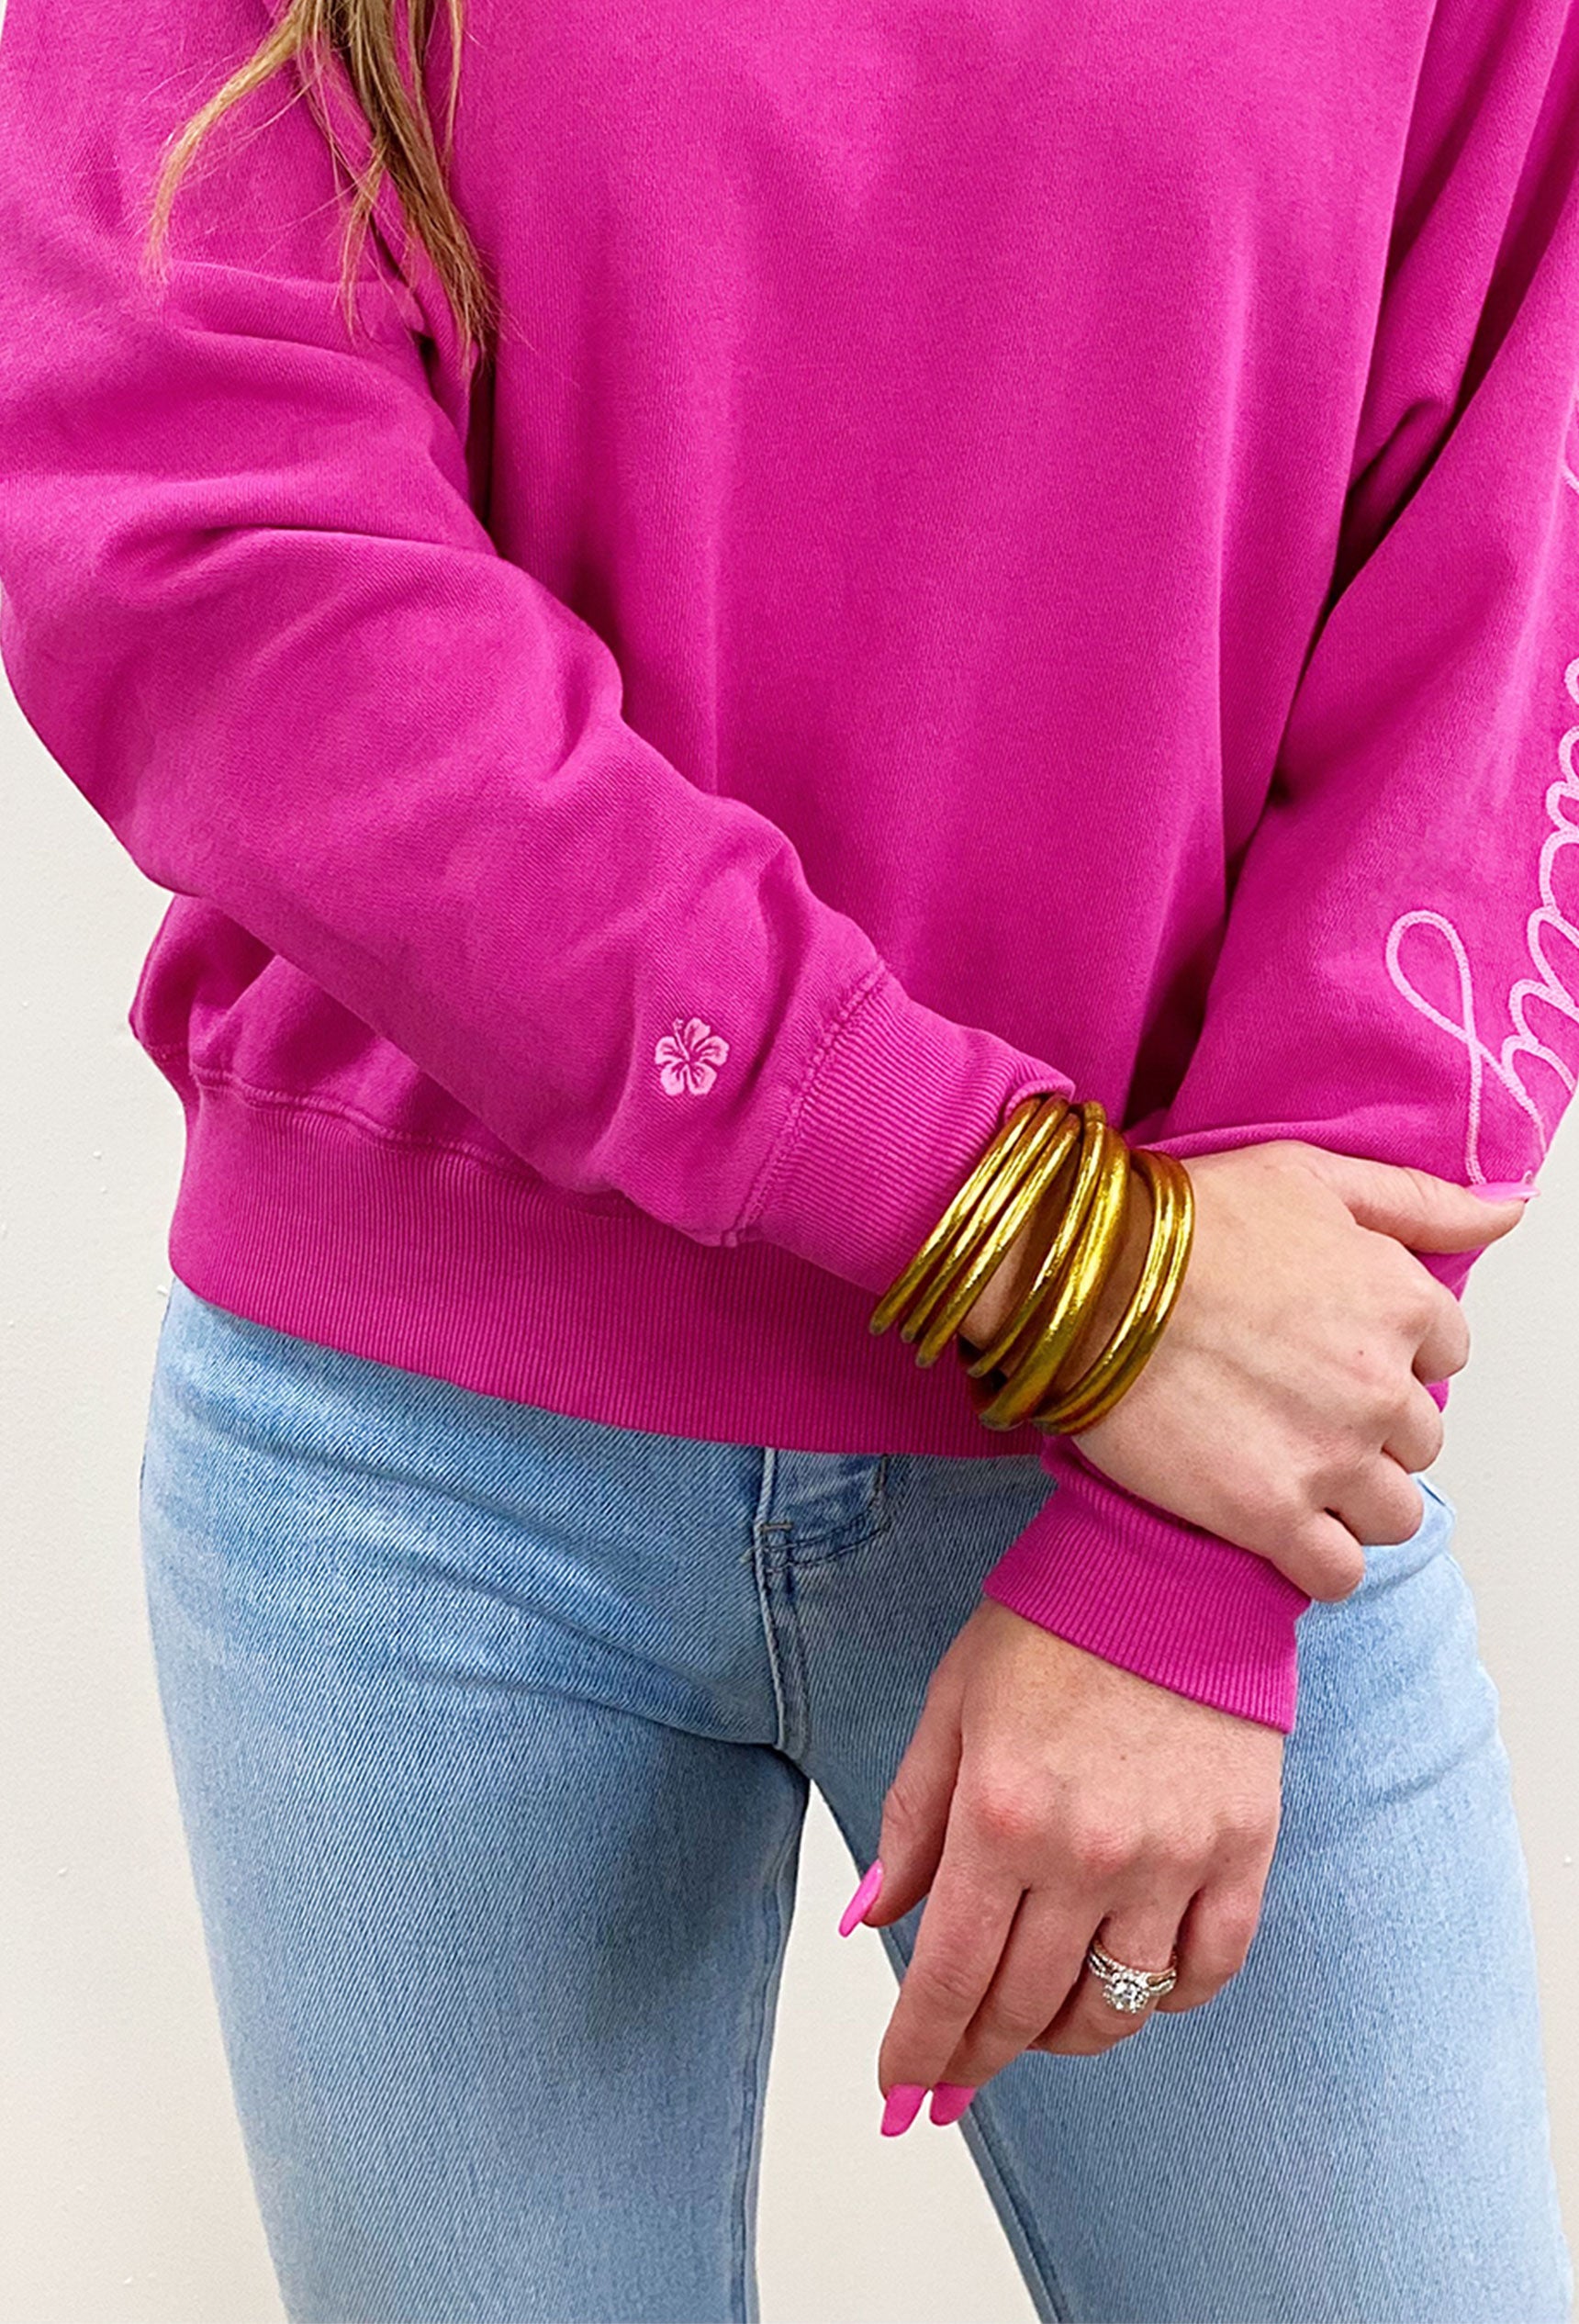 Z SUPPLY Vintage Statement Sweatshirt in Fiesta Fuchsia, pullover with embroidered wording on the sleeve, embroidered flower detailing on the opposite sleeve